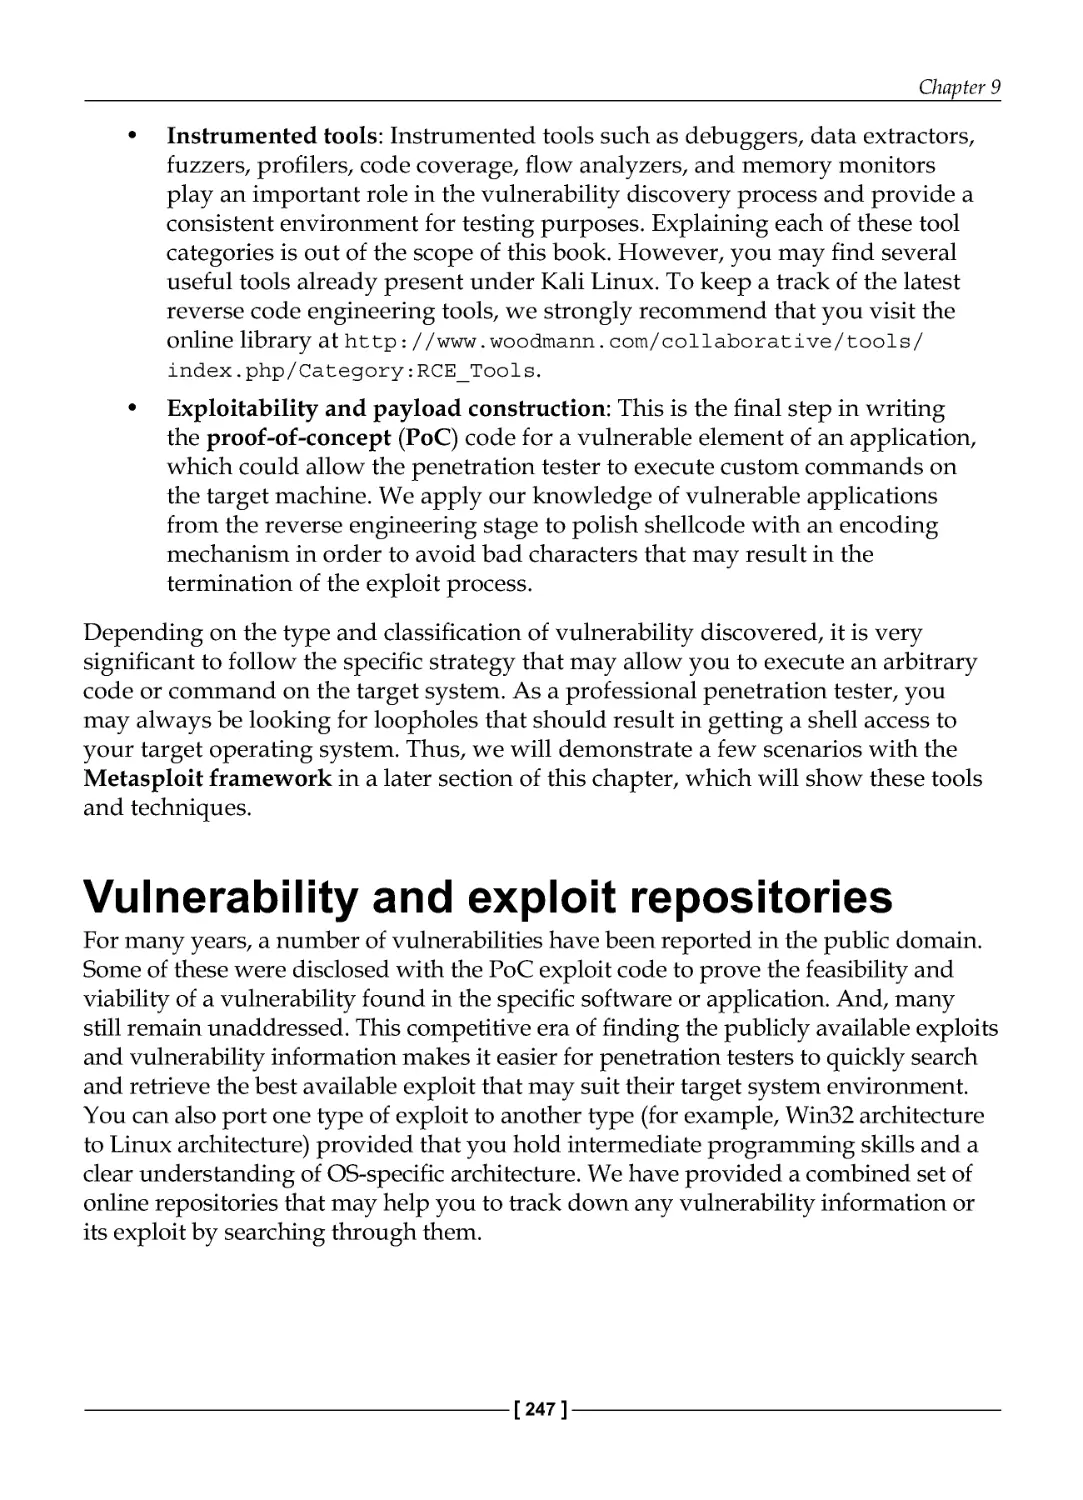 Vulnerability and exploit repositories